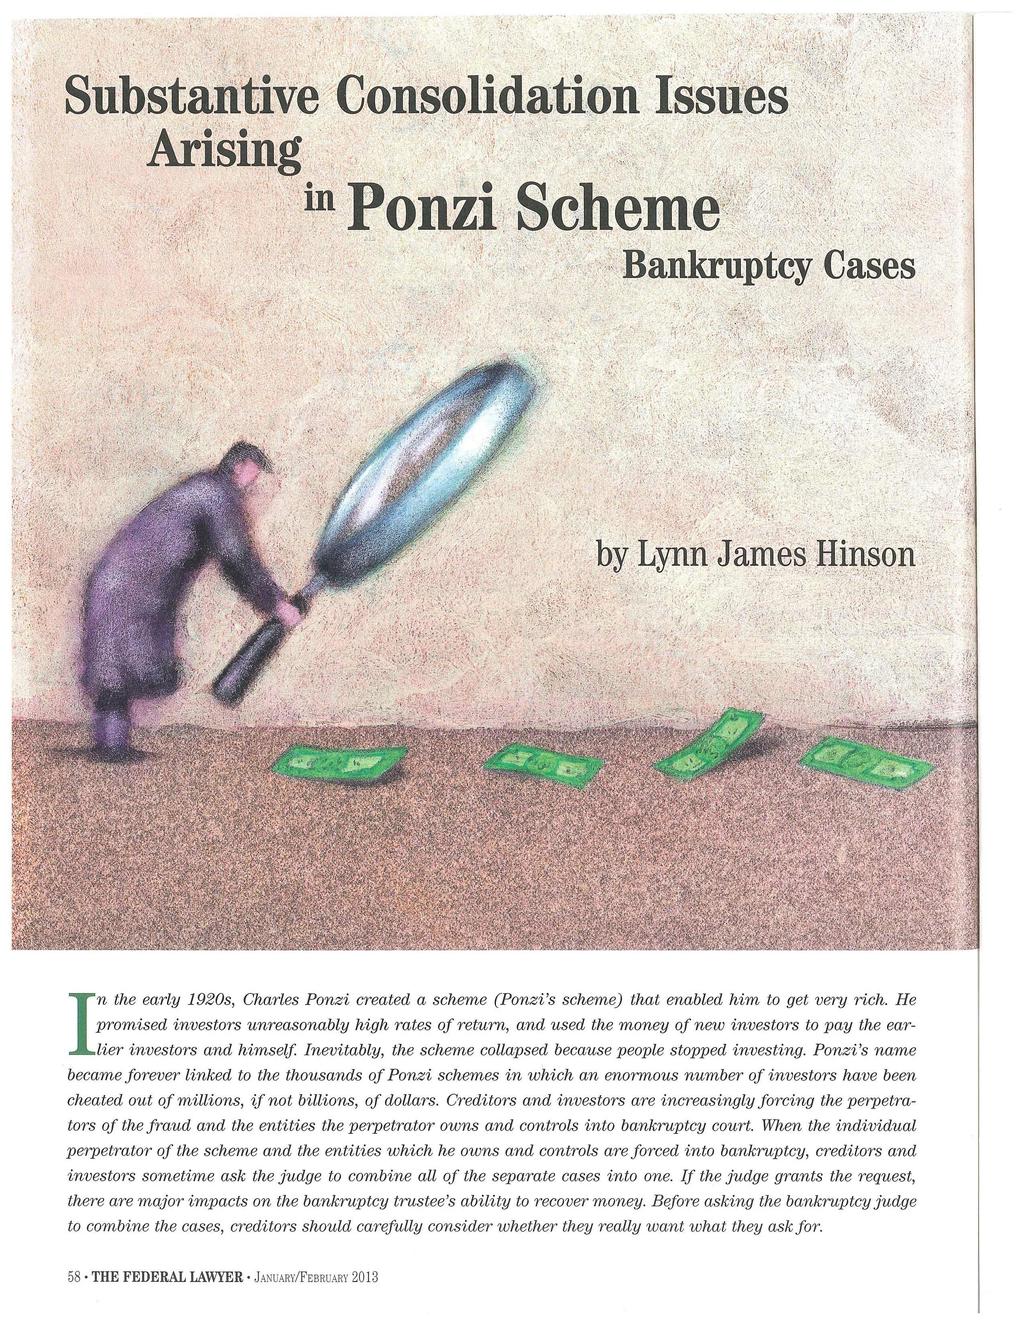 tnhe early 1920s, Charles Ponzi created a scheme (Ponzi's scheme) that enabled him to get very rich.